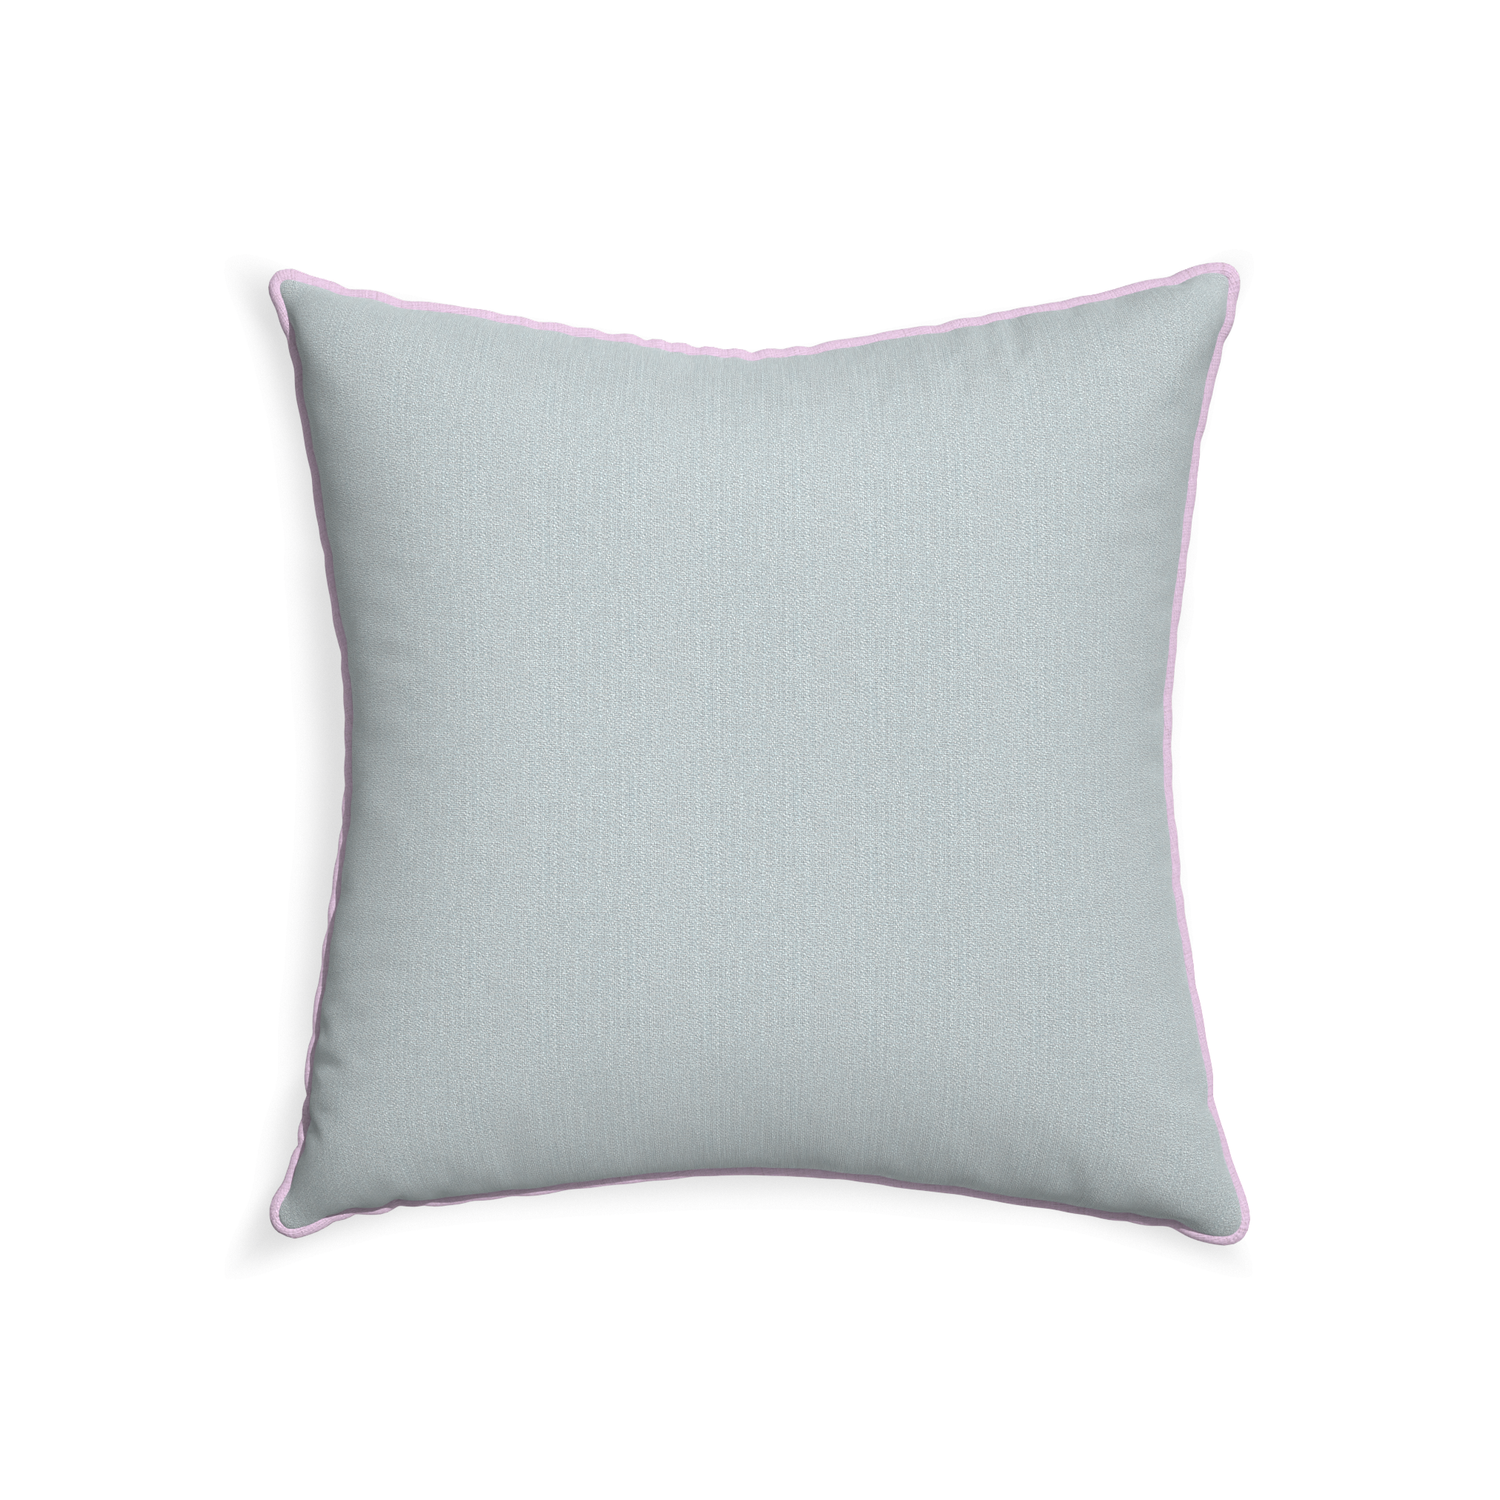 22-square sea custom grey bluepillow with l piping on white background